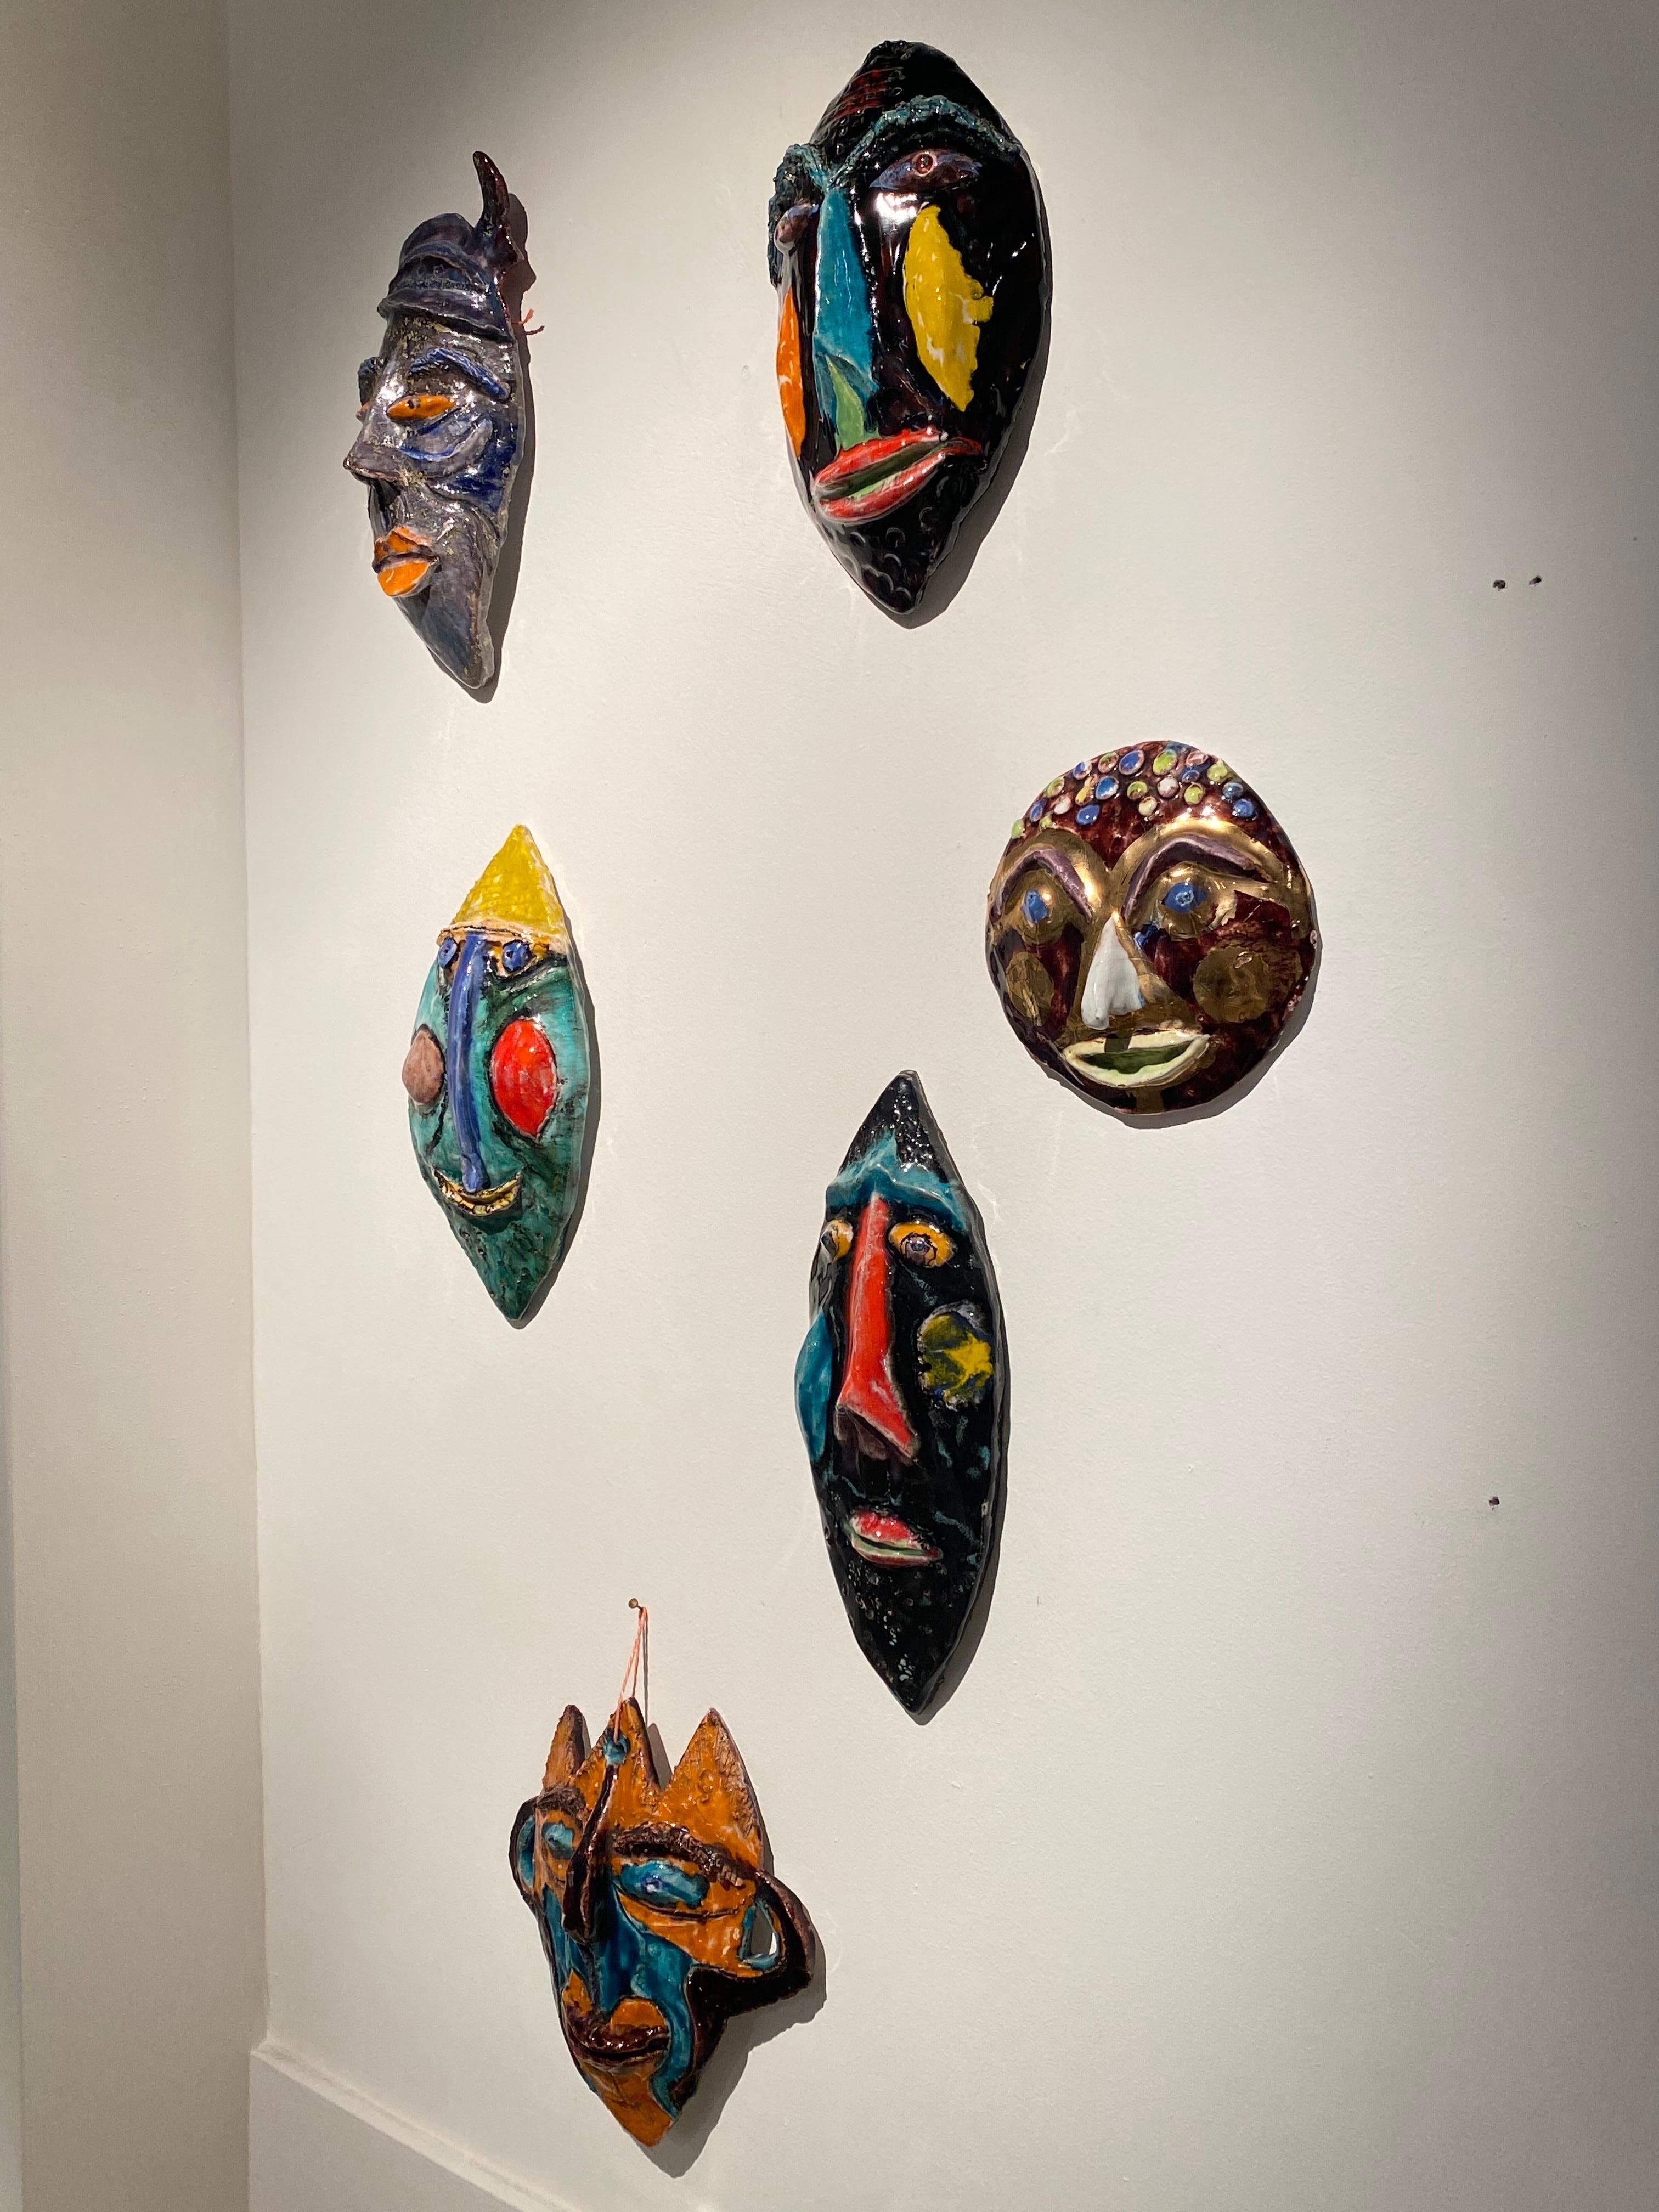 Rare Set of 6 ceramic hand painted mask BY Elio Schiavon.
Signed on the back
Itali circa 1960
Great condition

dimension of the biggets one its marked below